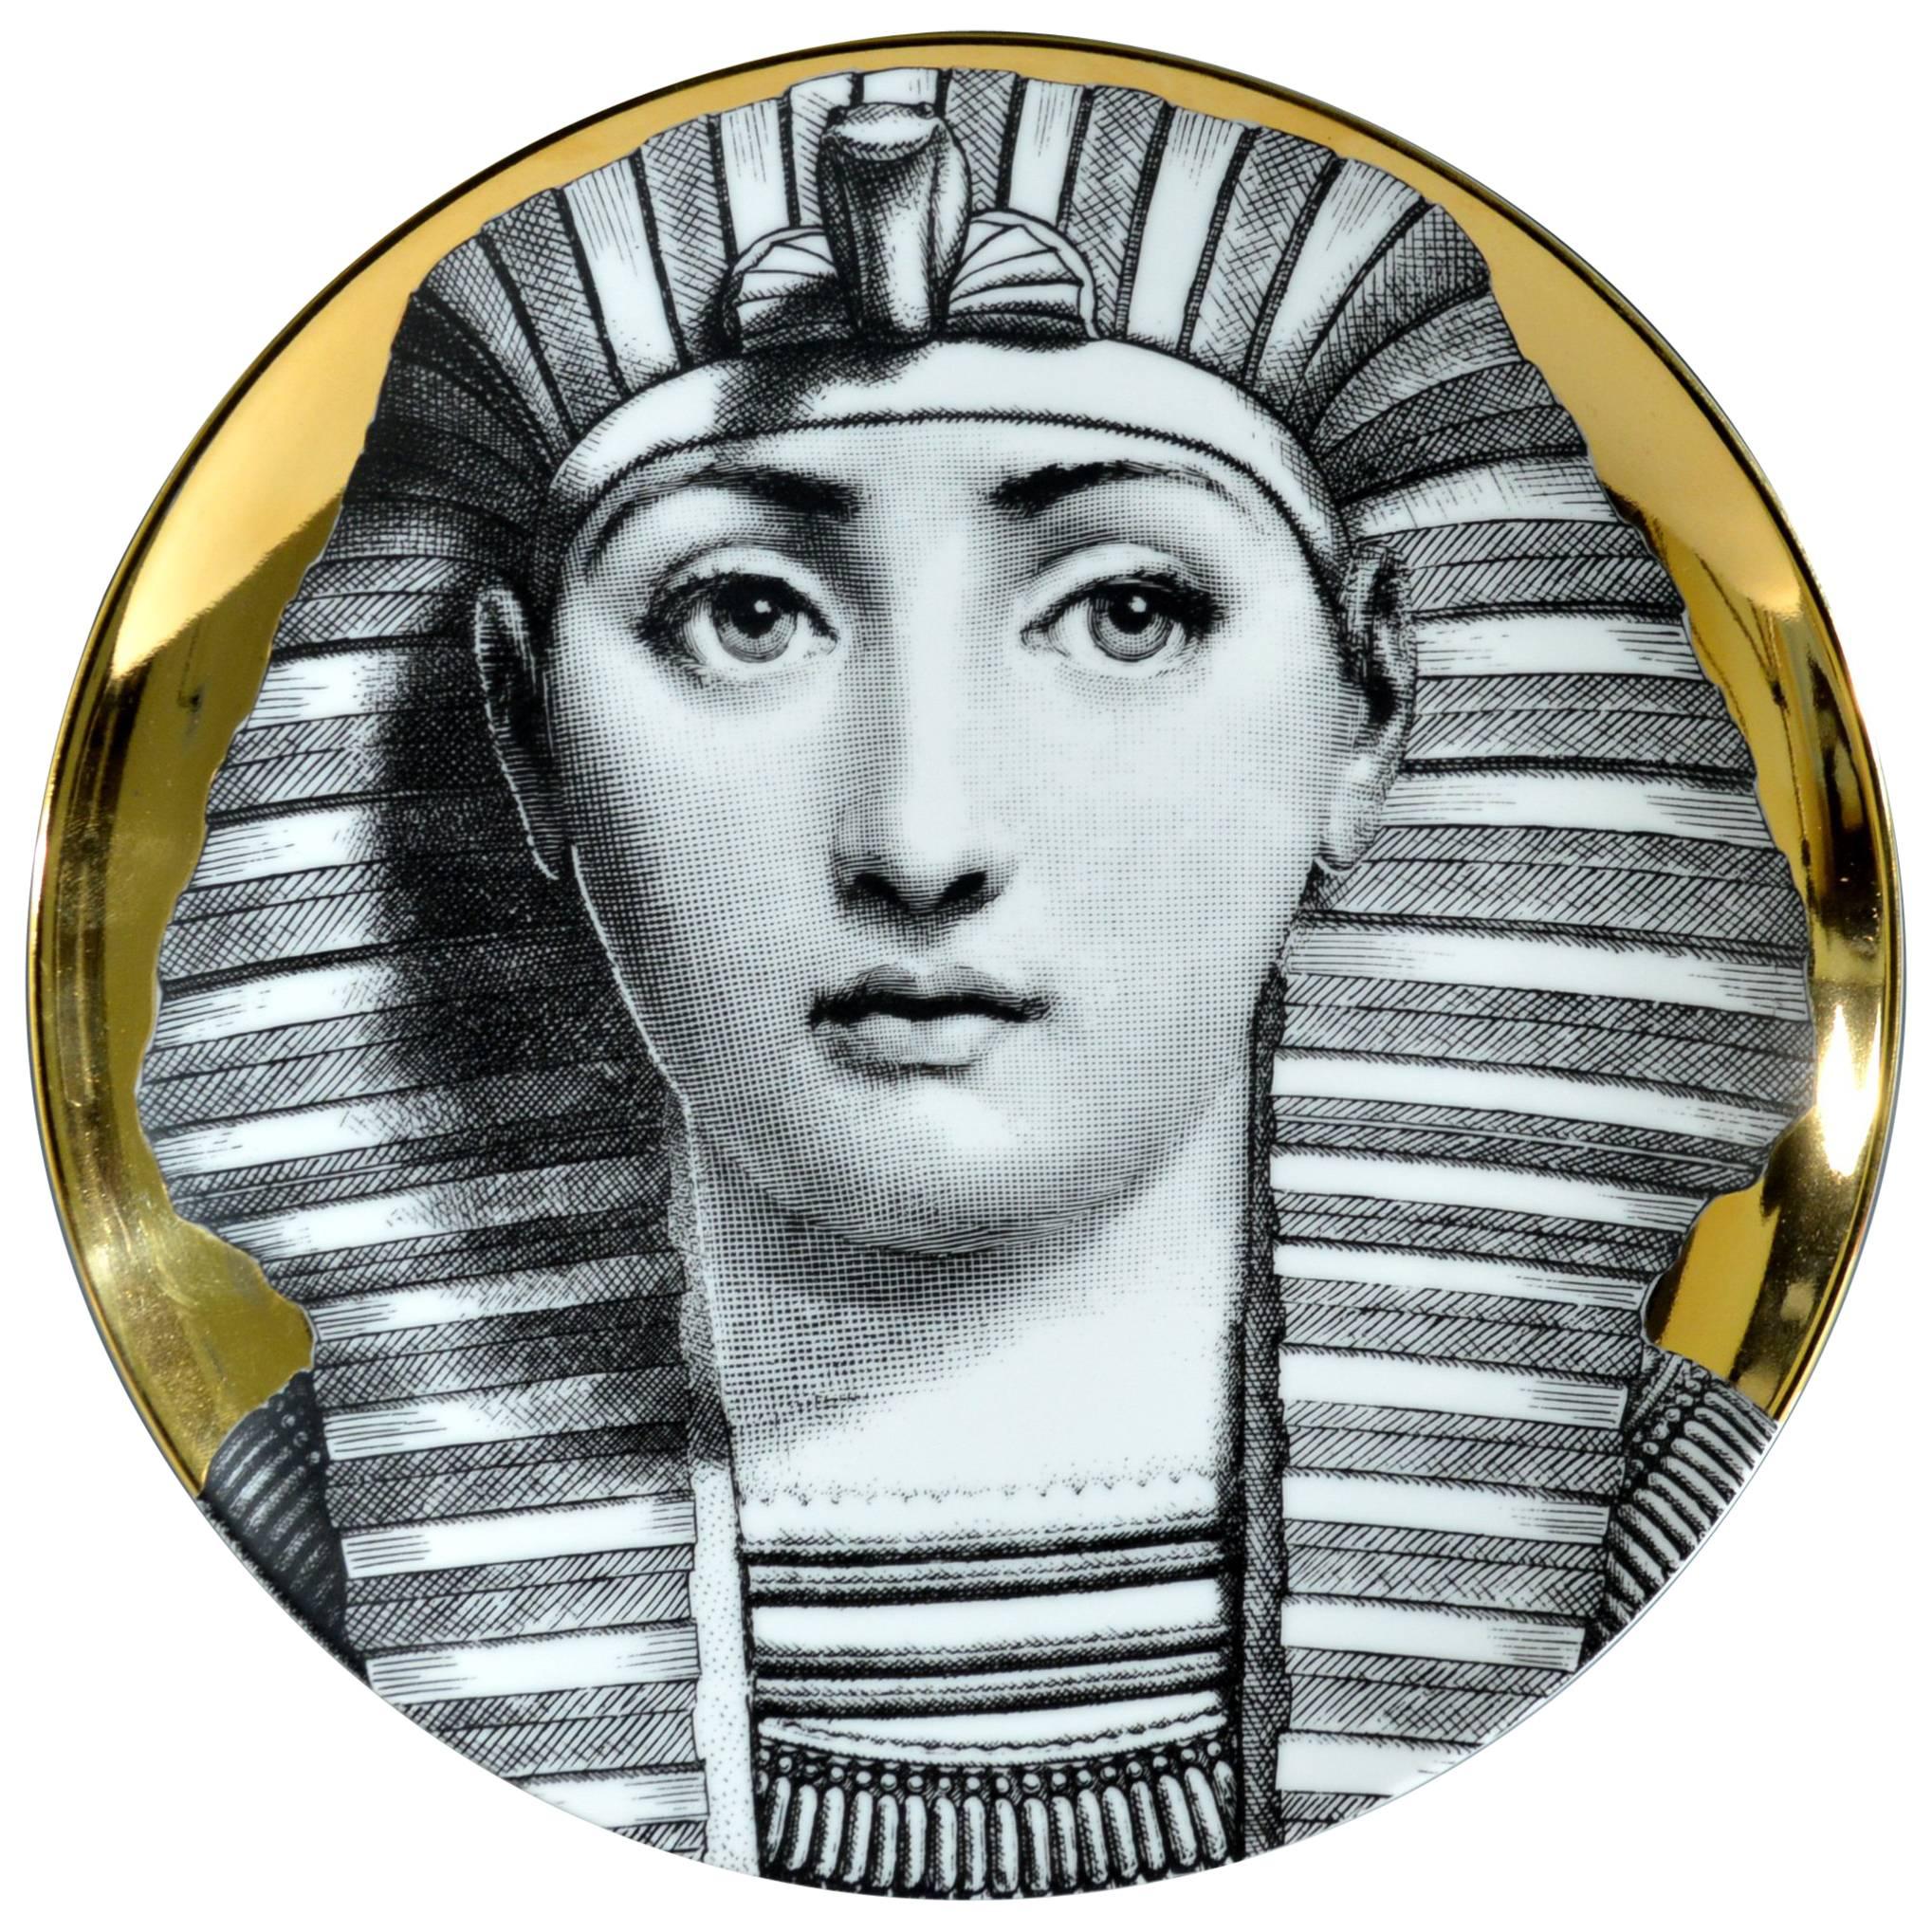 Atelier Fornasetti Gold Tema E Variazioni Plate, Number 221